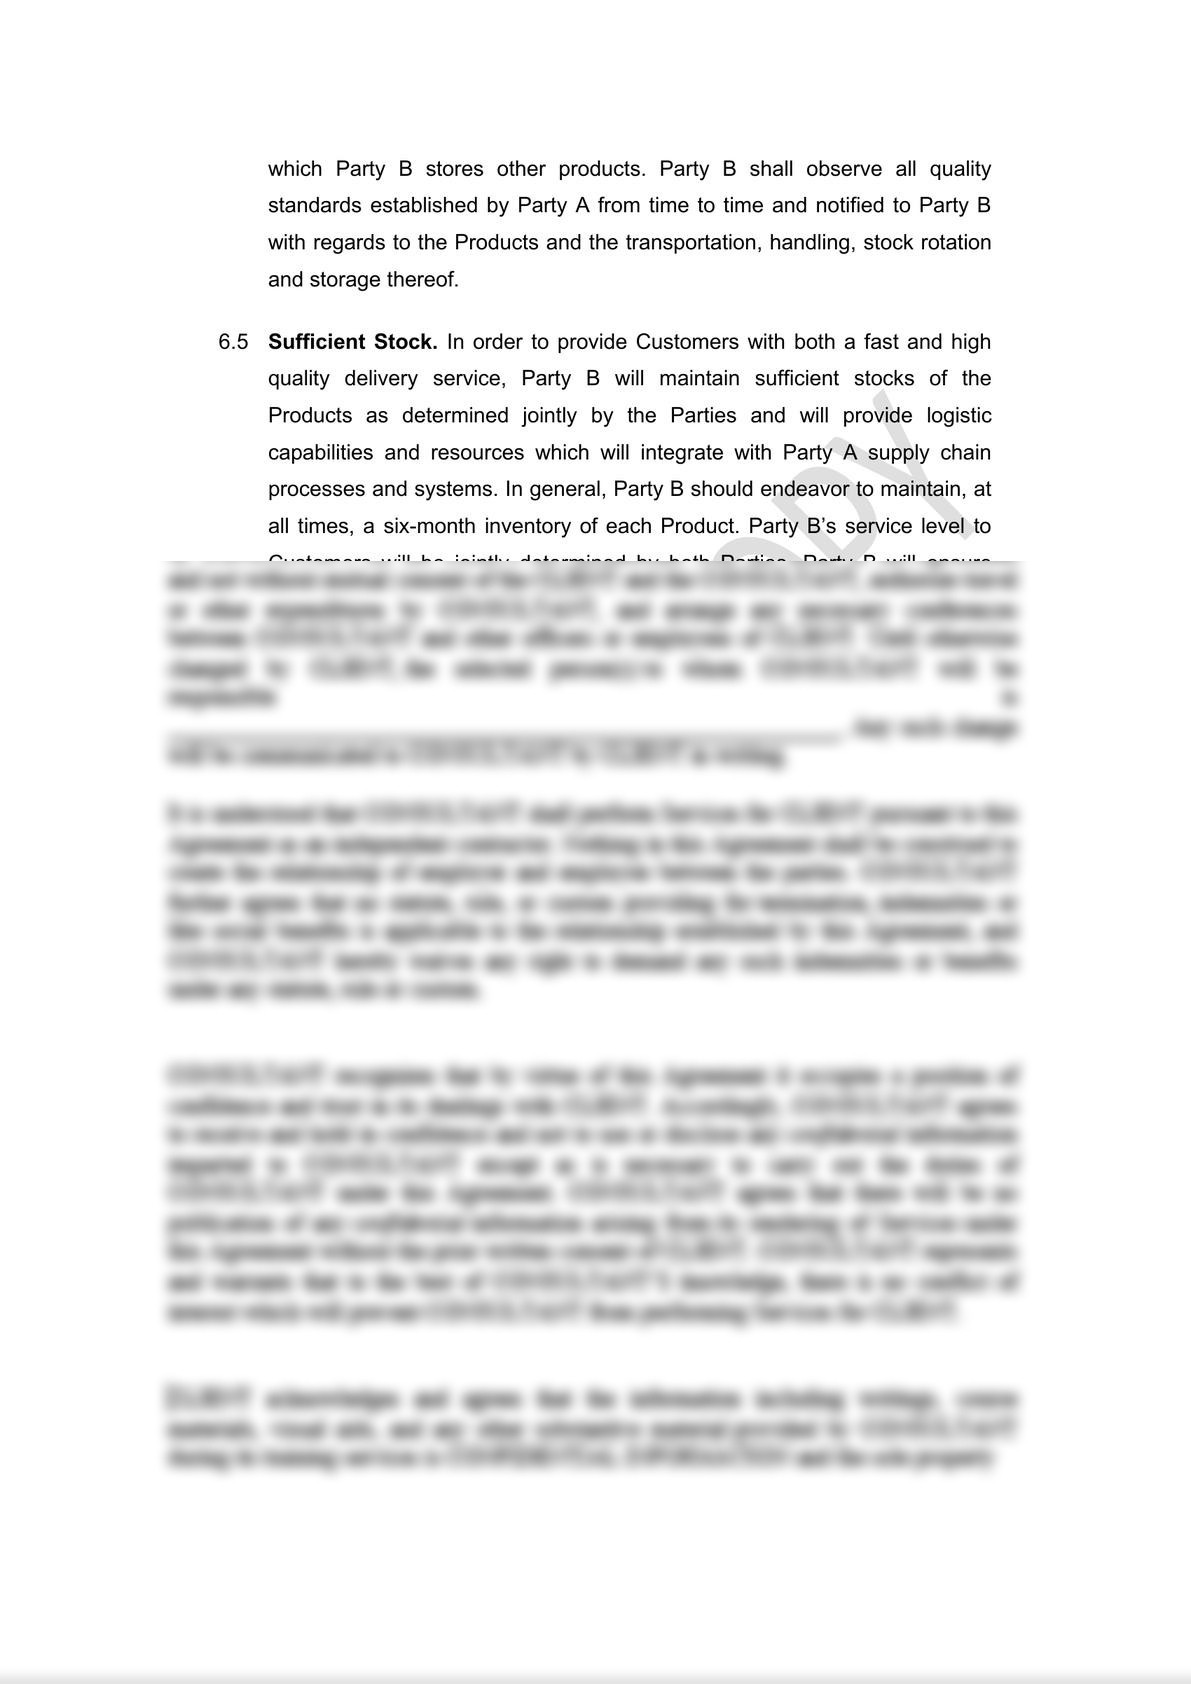 Oral Care Agreement Draft -9